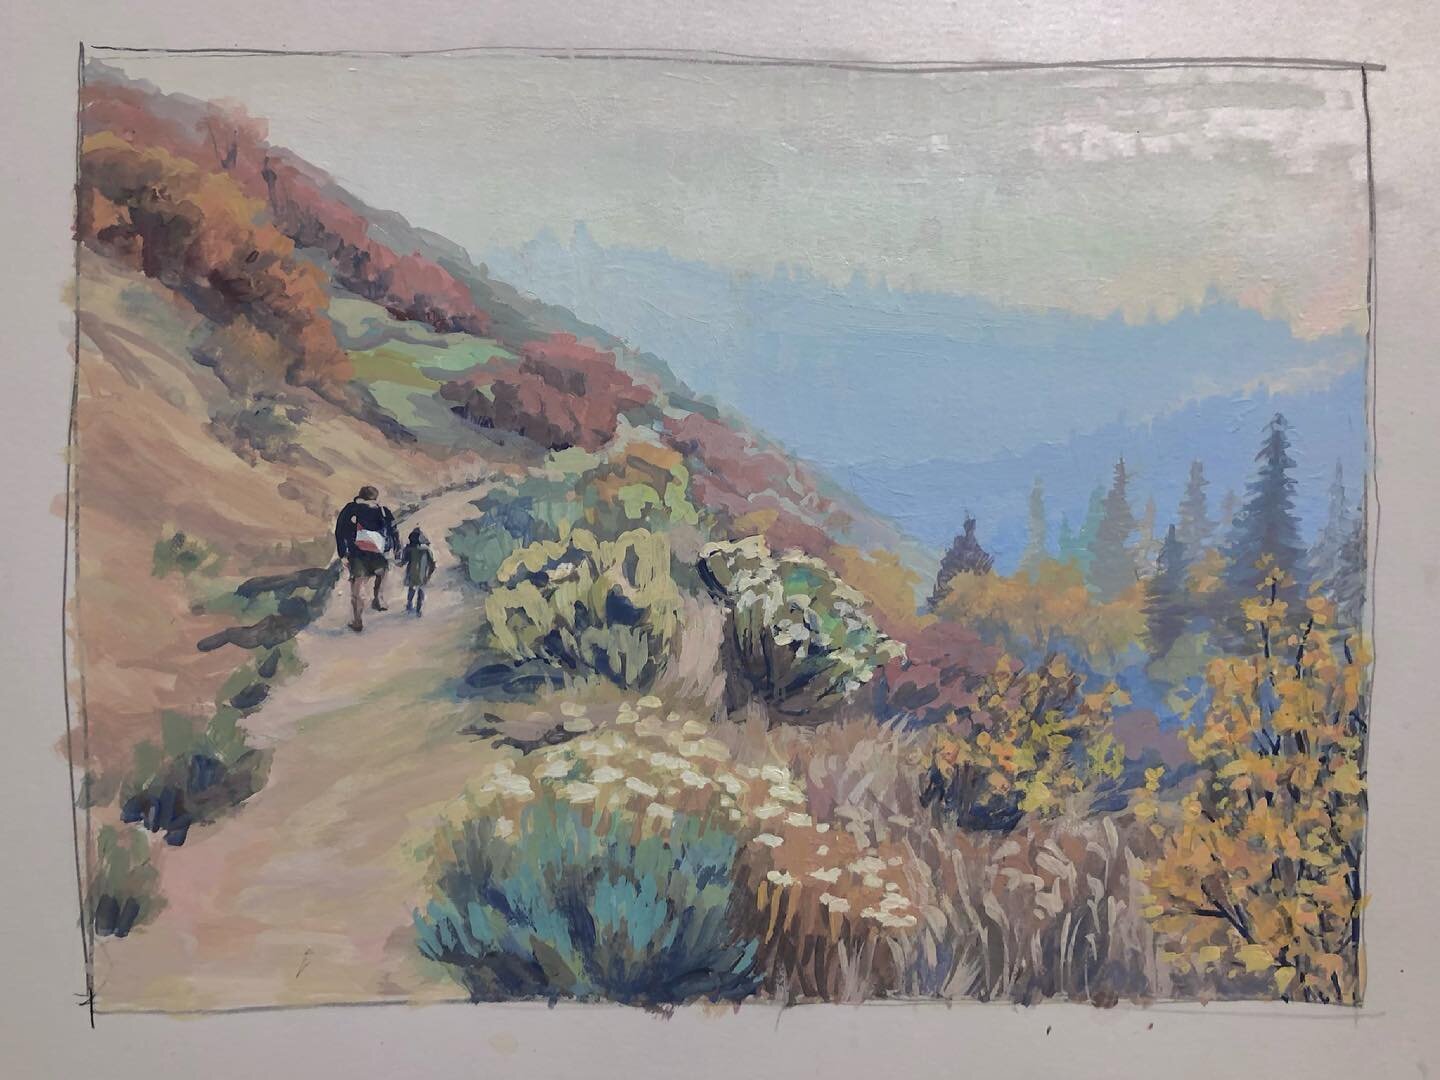 A favorite hike in Steamboat Springs, CO. 

8x11&ldquo;, gouache on paper.

This was on Mad Creek trail, which lead to a famous old barn in a beautiful field. I like how the smoke in the air makes it look more like a memory. There were forest fires n